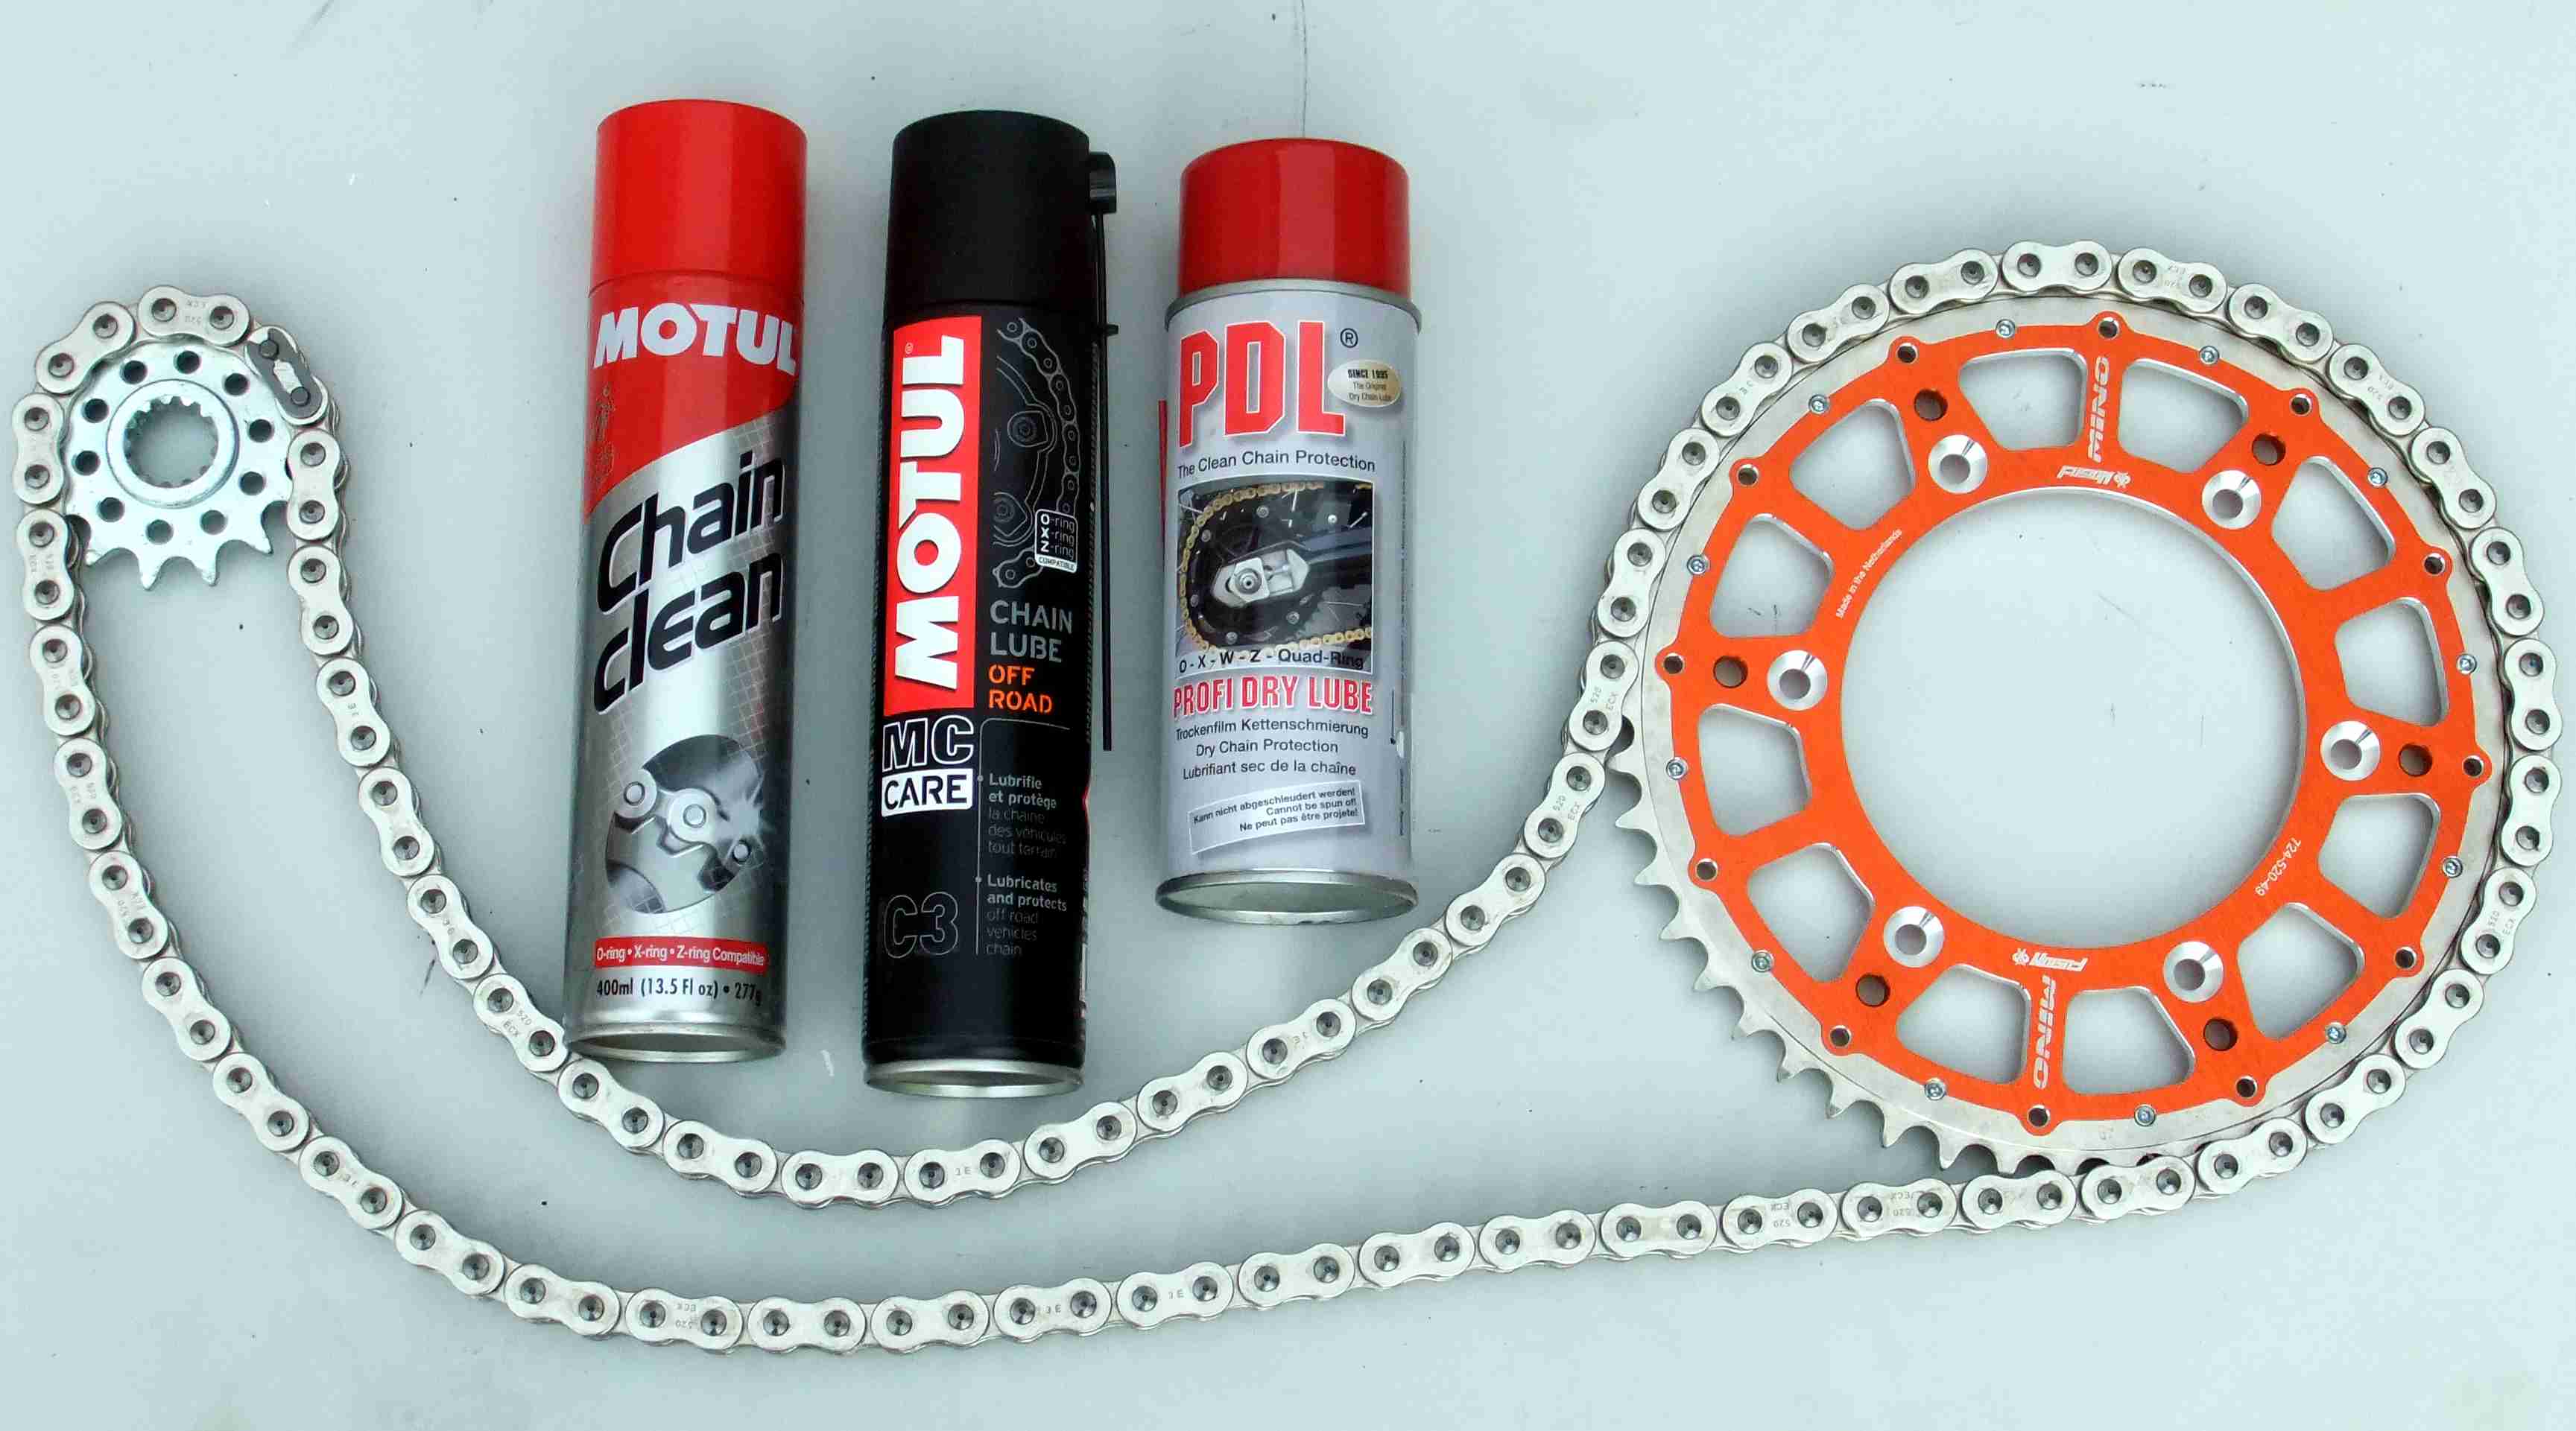 ON REQUEST OFFROAD CHAIN SET WITH THE DOSE FOR KIT SILVER / BLACK / OR COLOURED ON KAWASAKI KX 65 2000-, SUZUKI RM 65 2002-